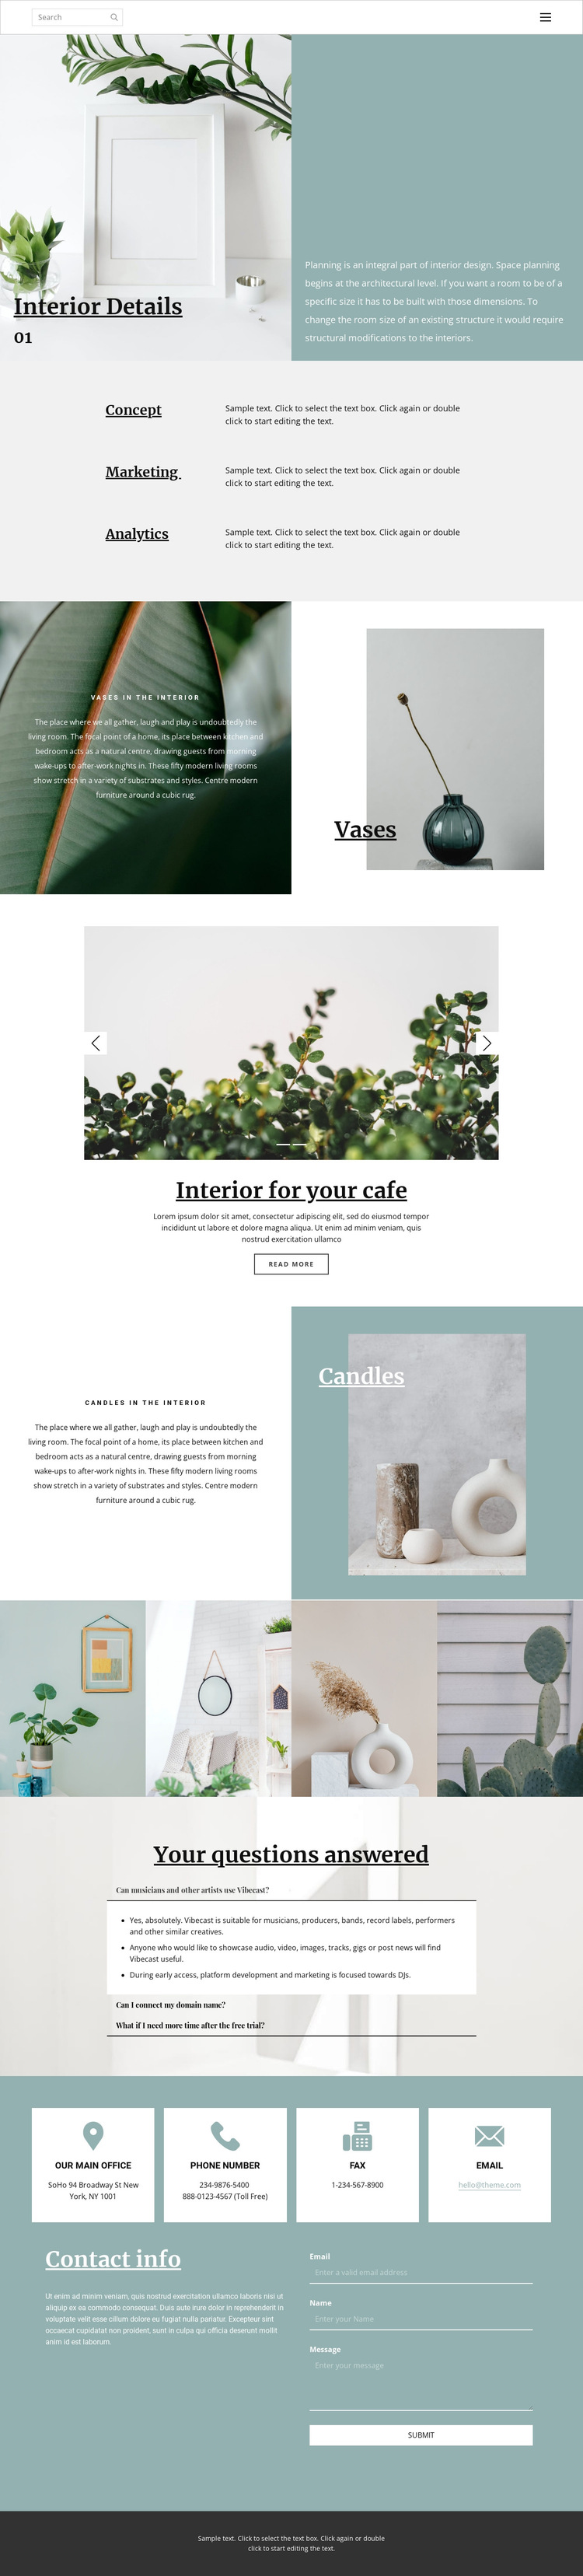 Help in organizing the space at home HTML5 Template